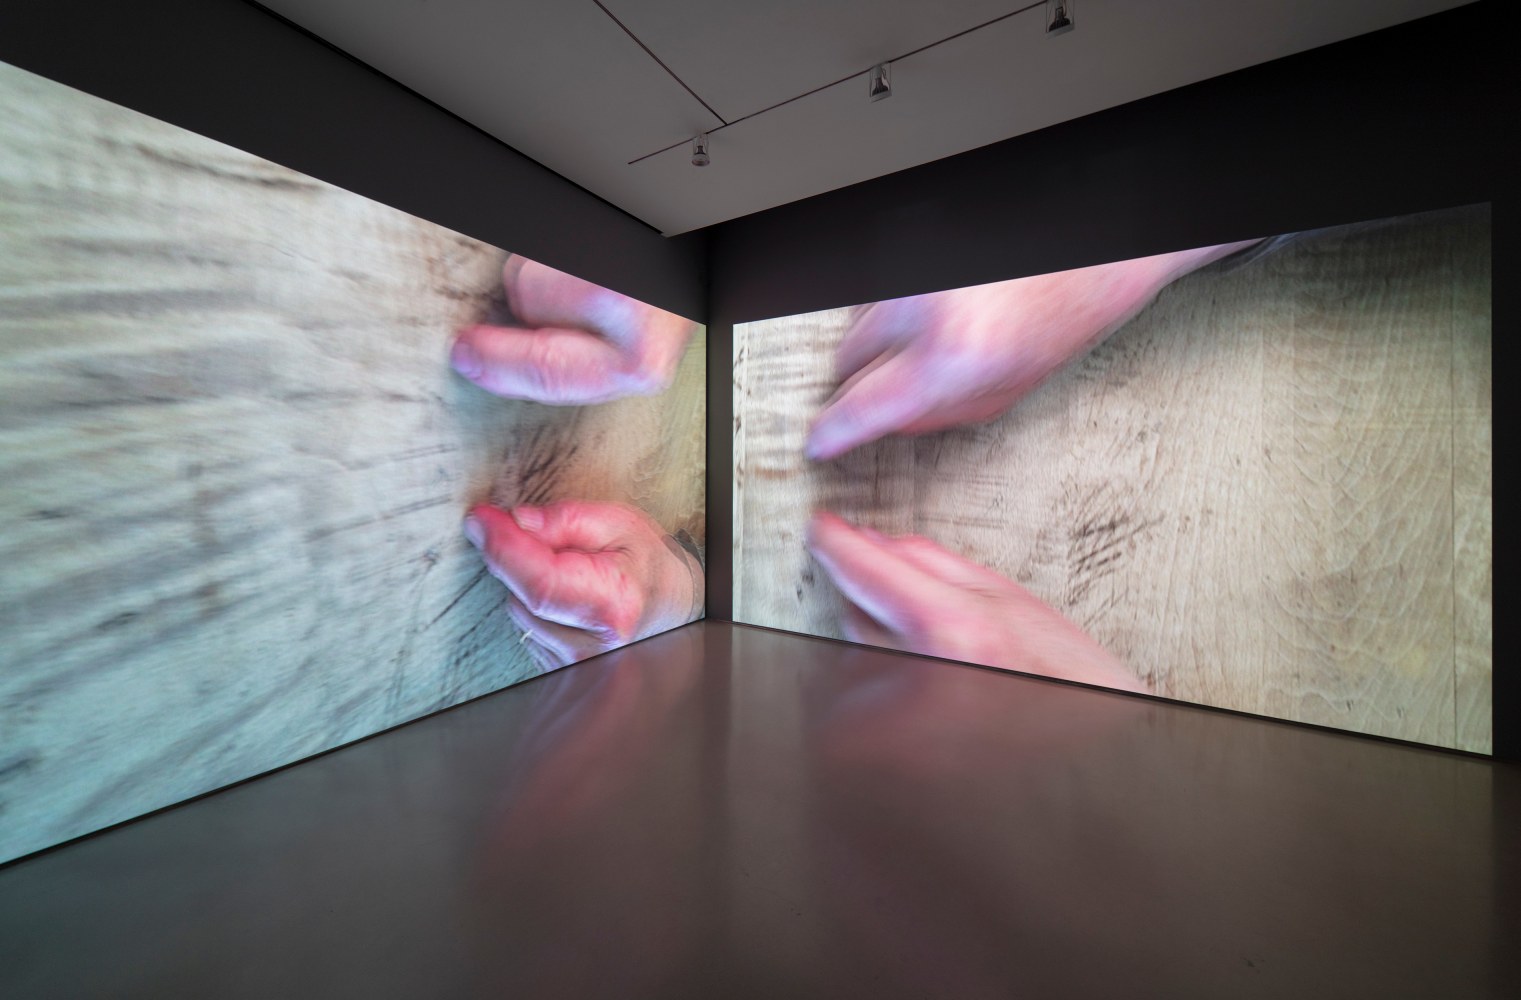 installation view of two video projections showing large hands over a wooden table